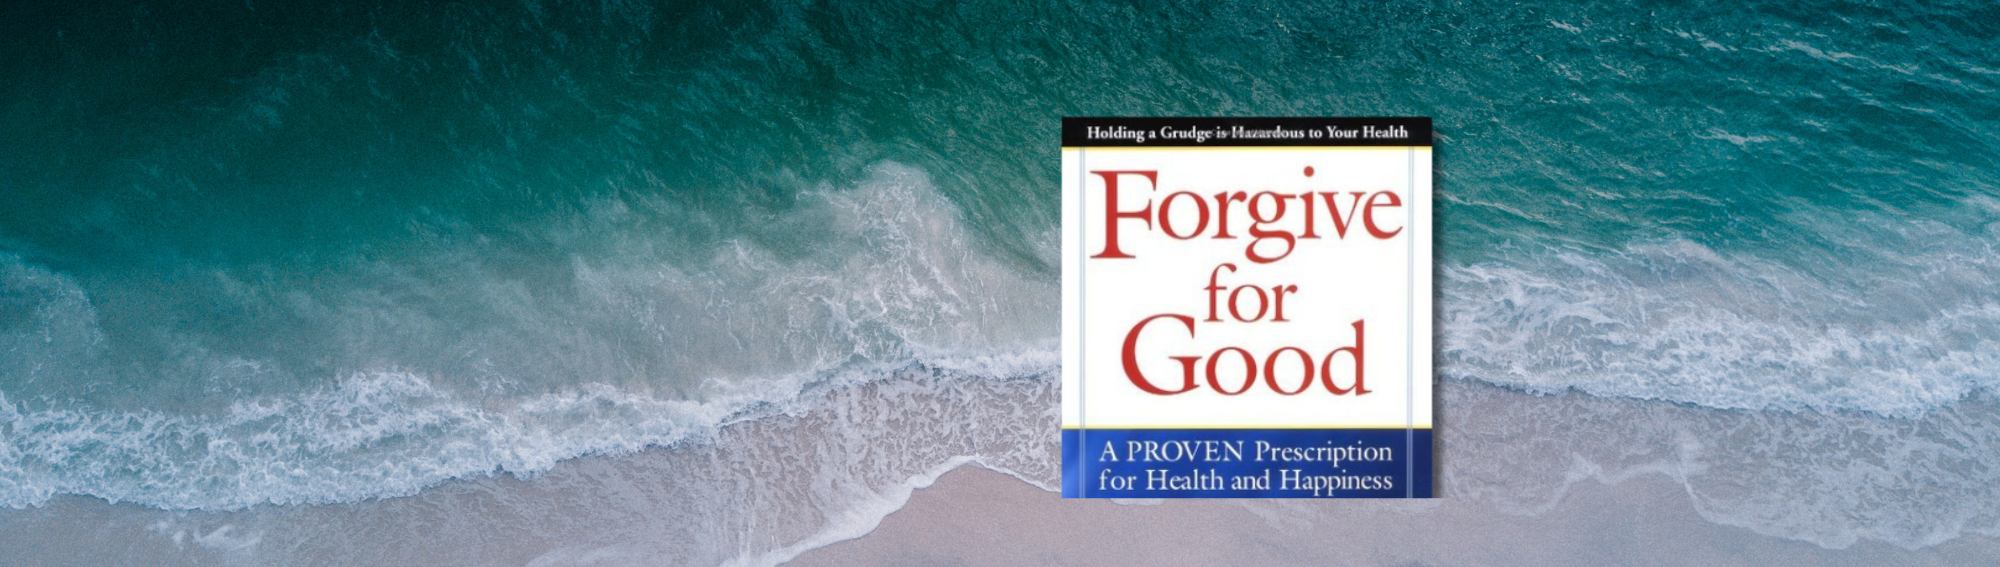 Workshop: 'Forgive for Good' with Lorena Griffin